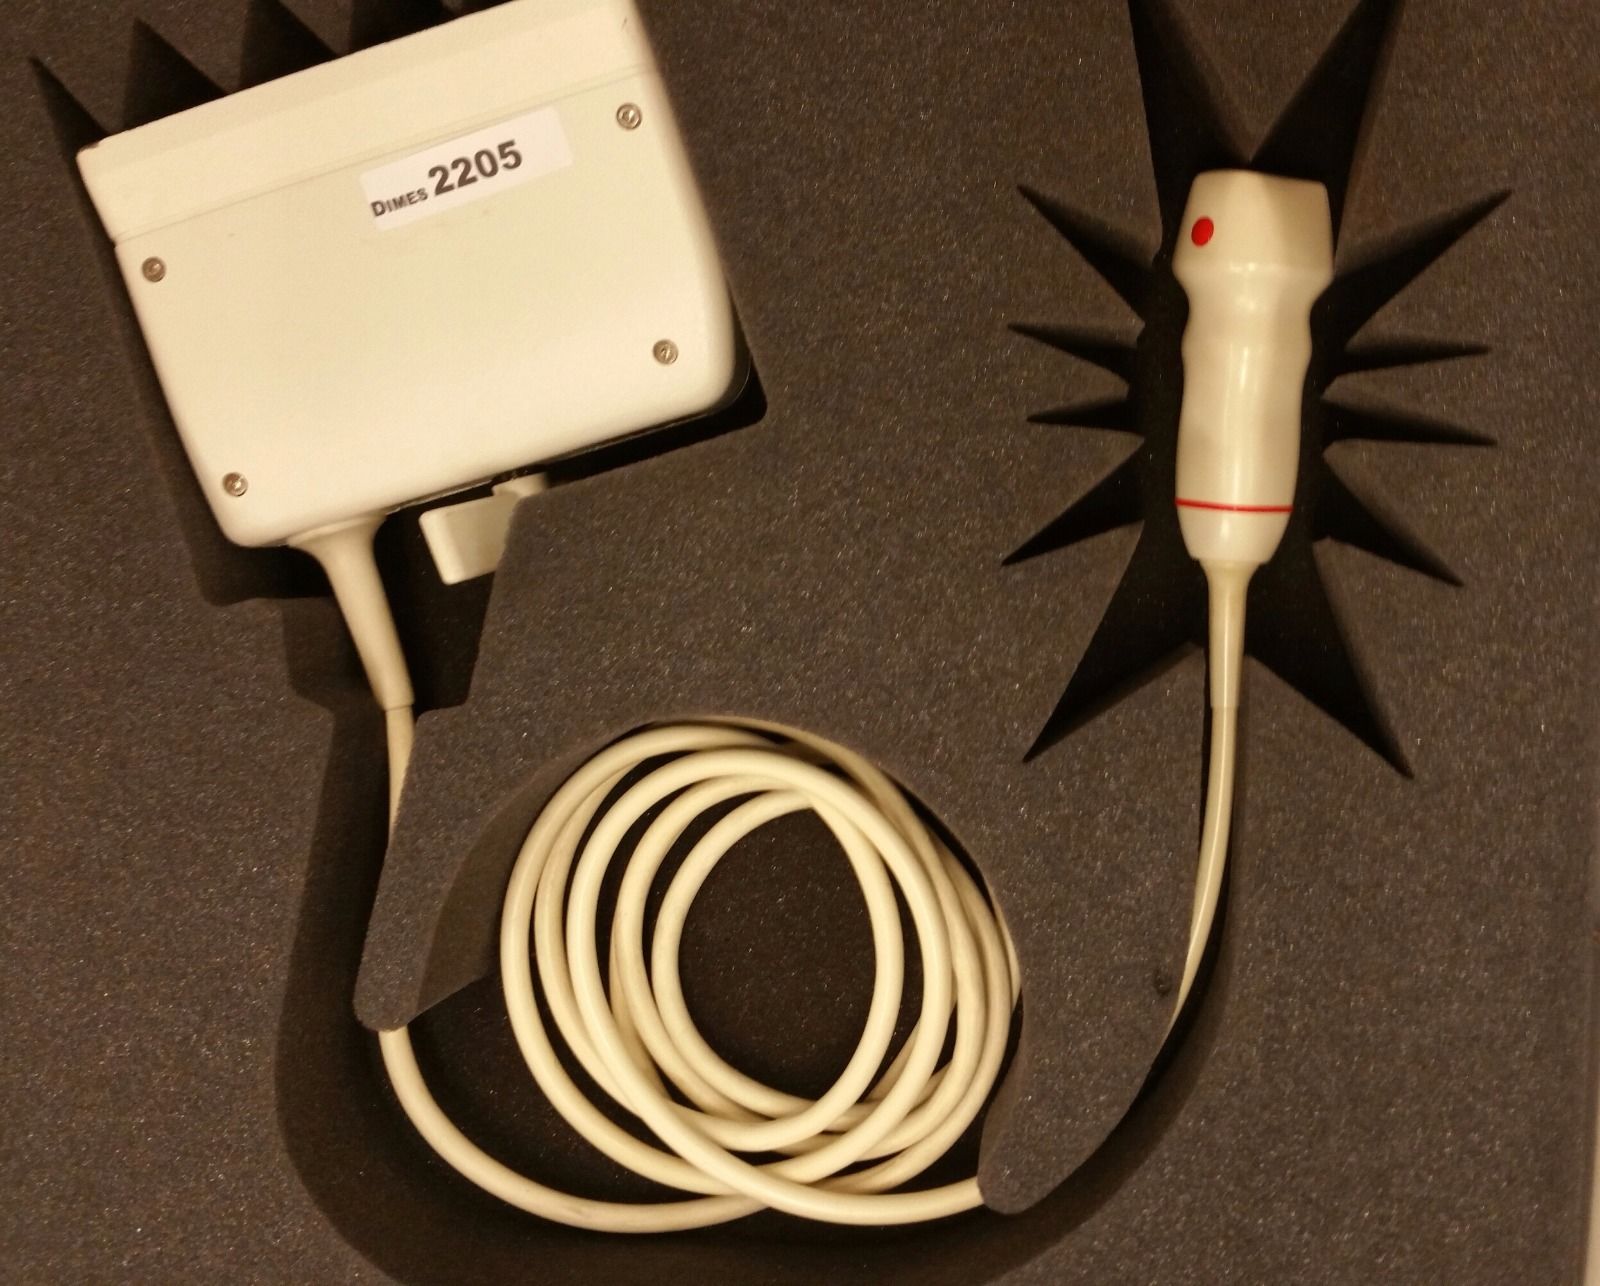 Philips ATL P4-2 Phased Array Ultrasound Transducer Probe Inv 2205